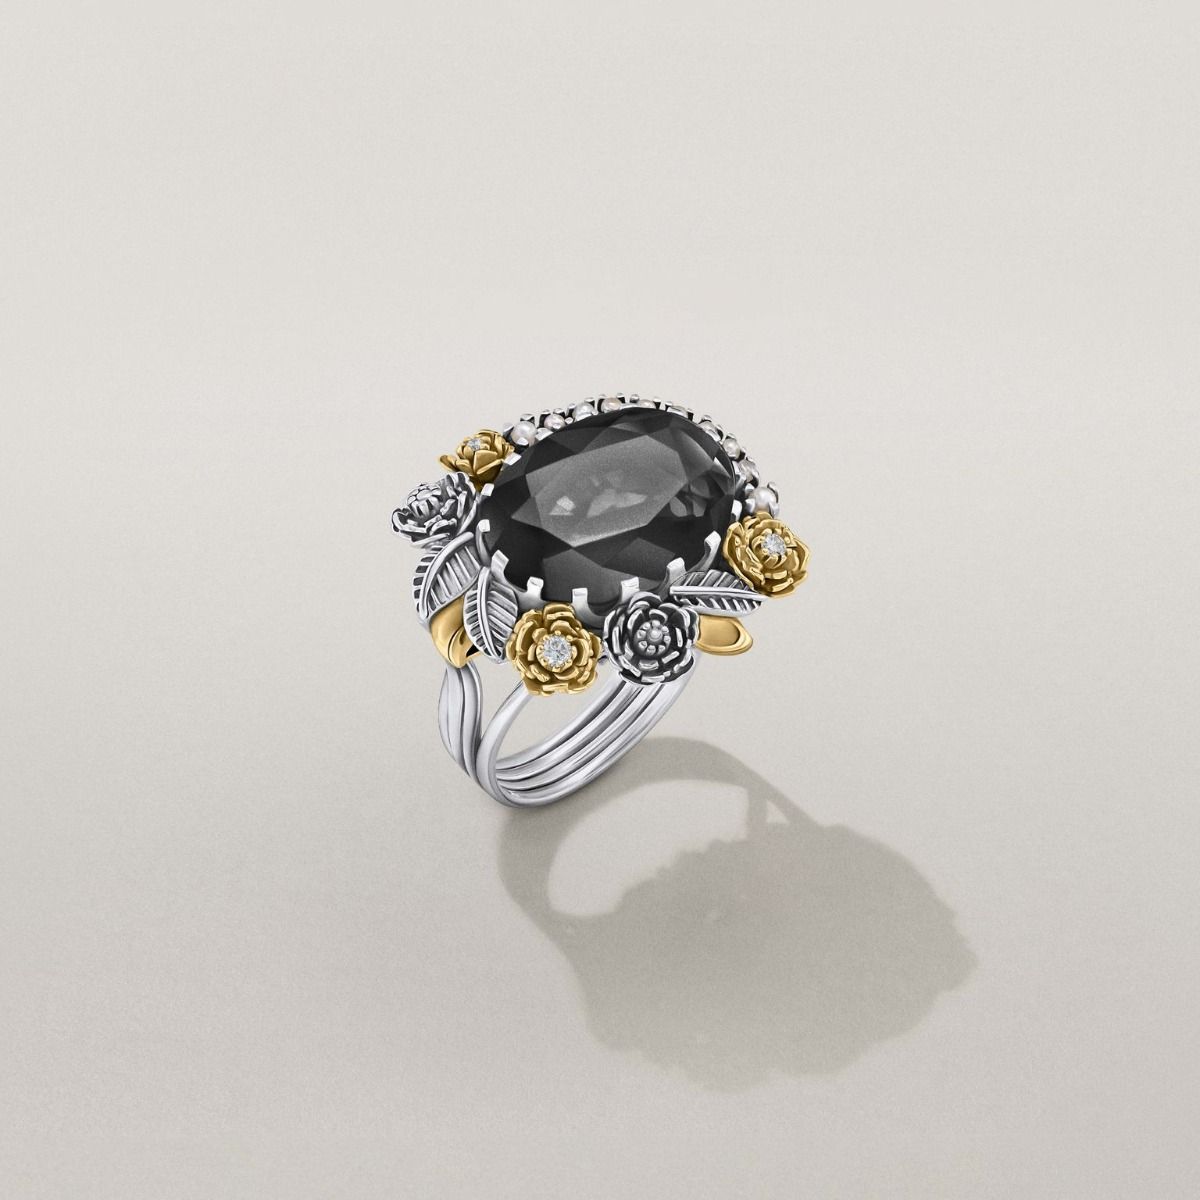 Labradorite Floral Bloom Ring by Azza Fahmy - Designer Rings